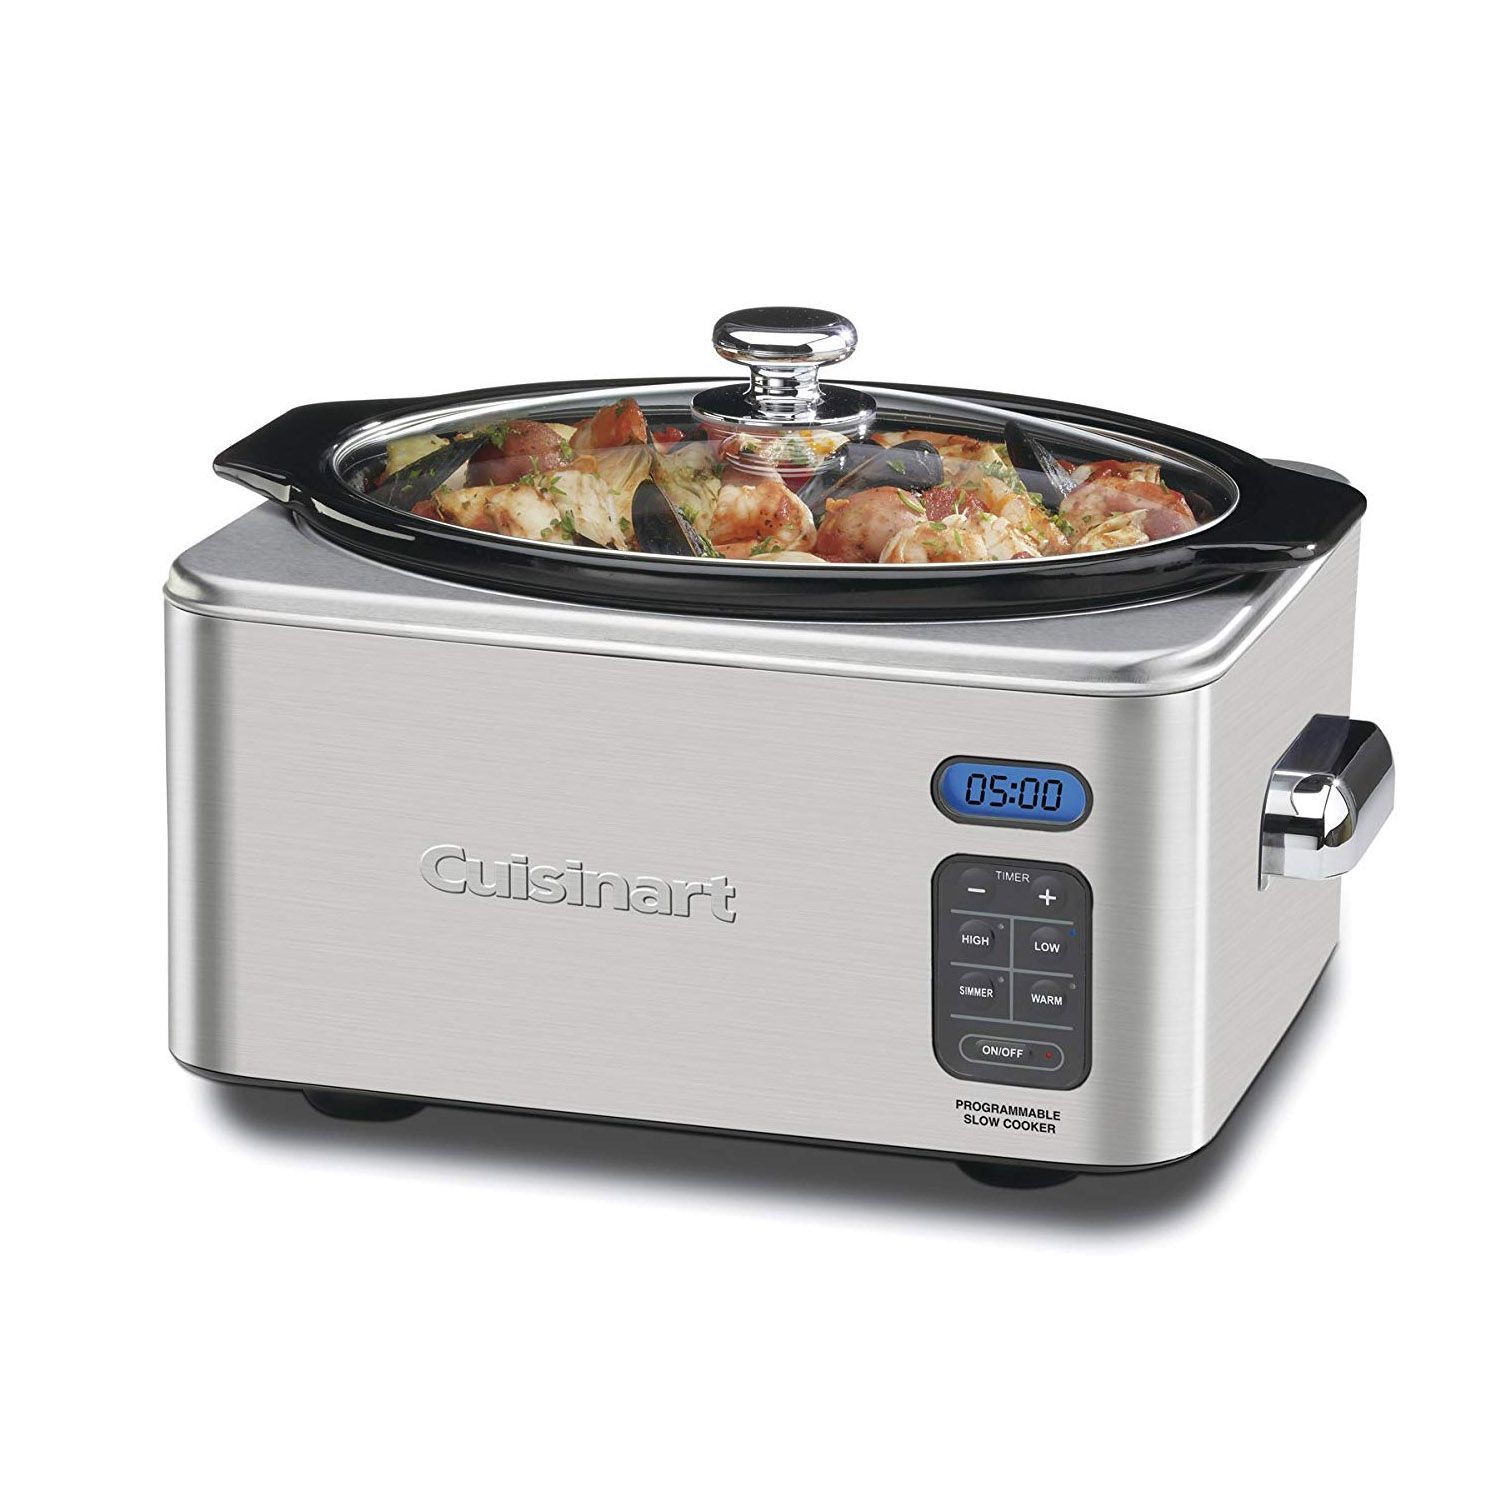 Programmable Slow Cooker